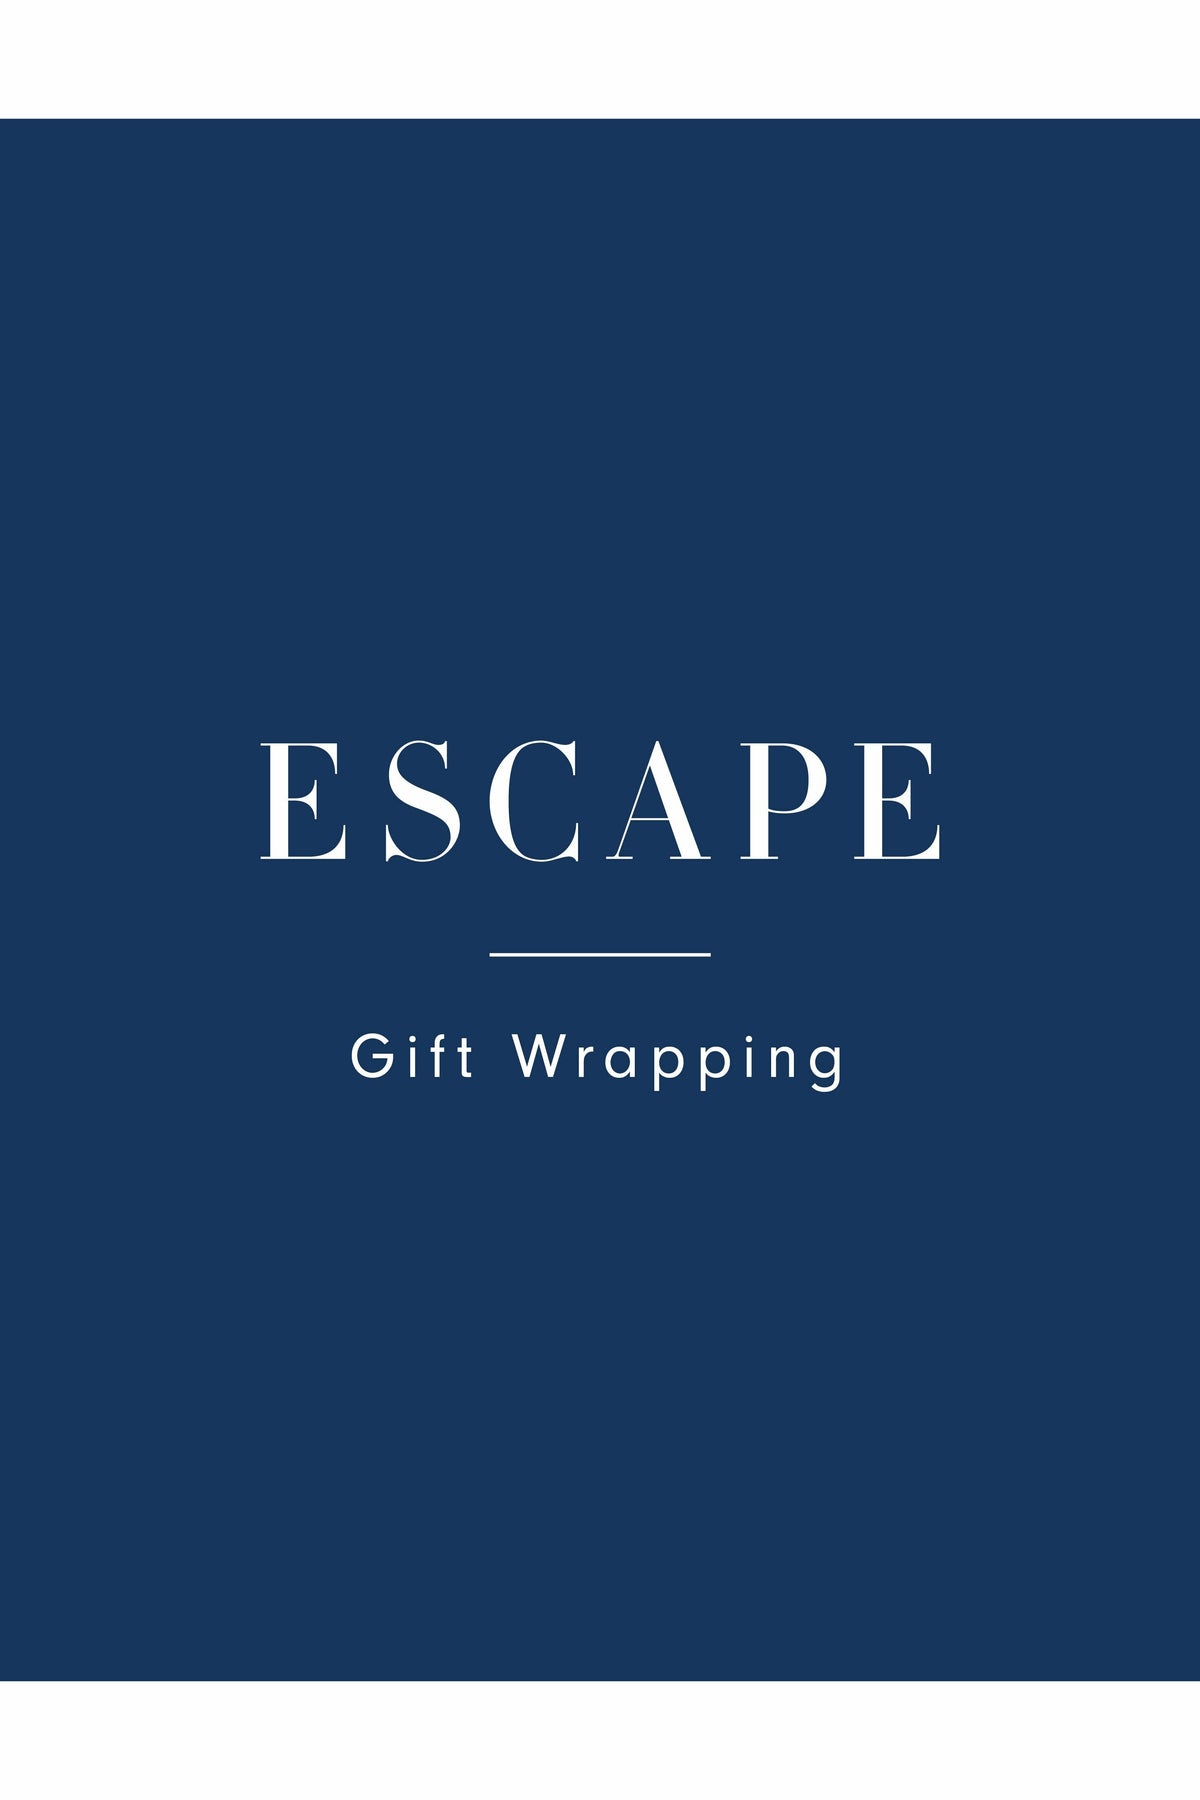 Free Gift Wrapping - Escape